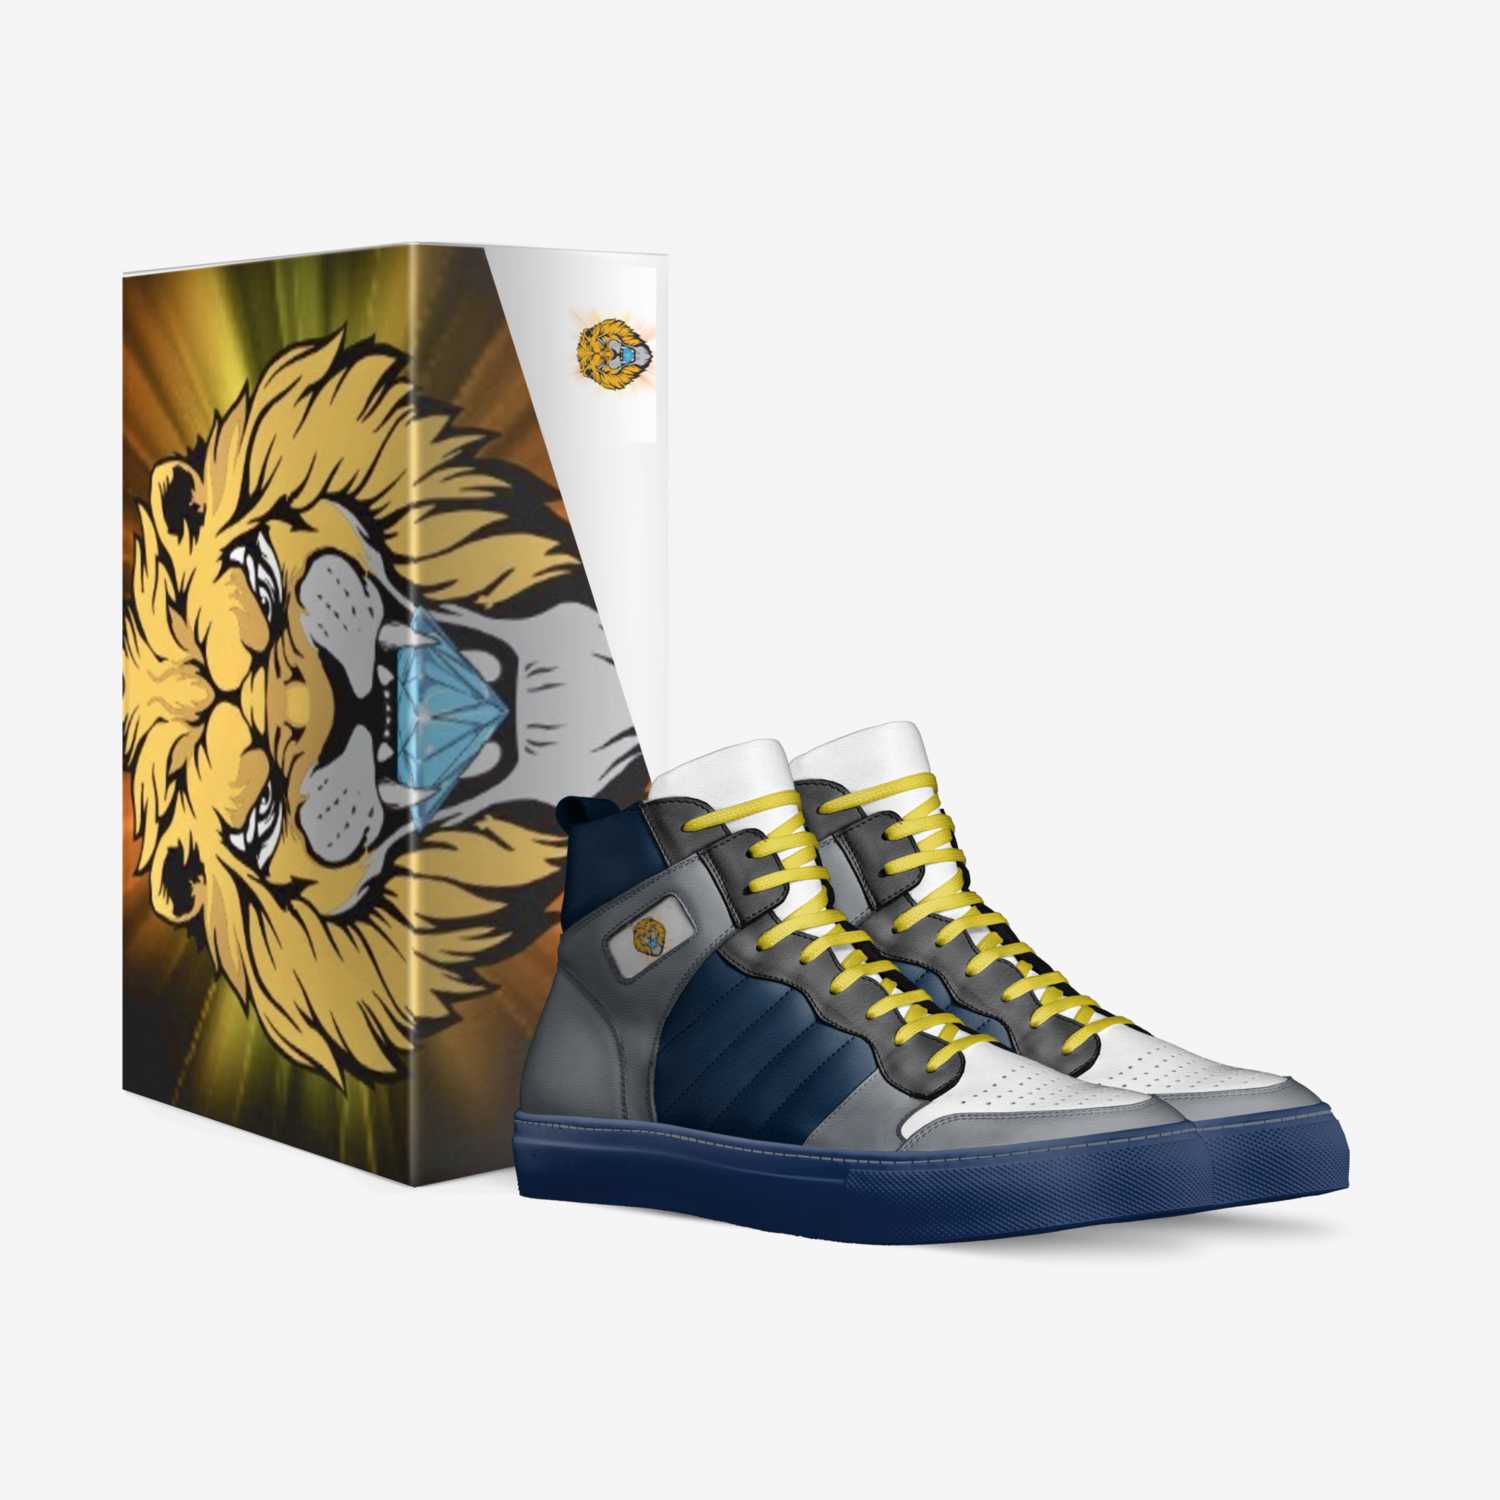 Majesty Royalty G1 custom made in Italy shoes by Virgil Leon | Box view